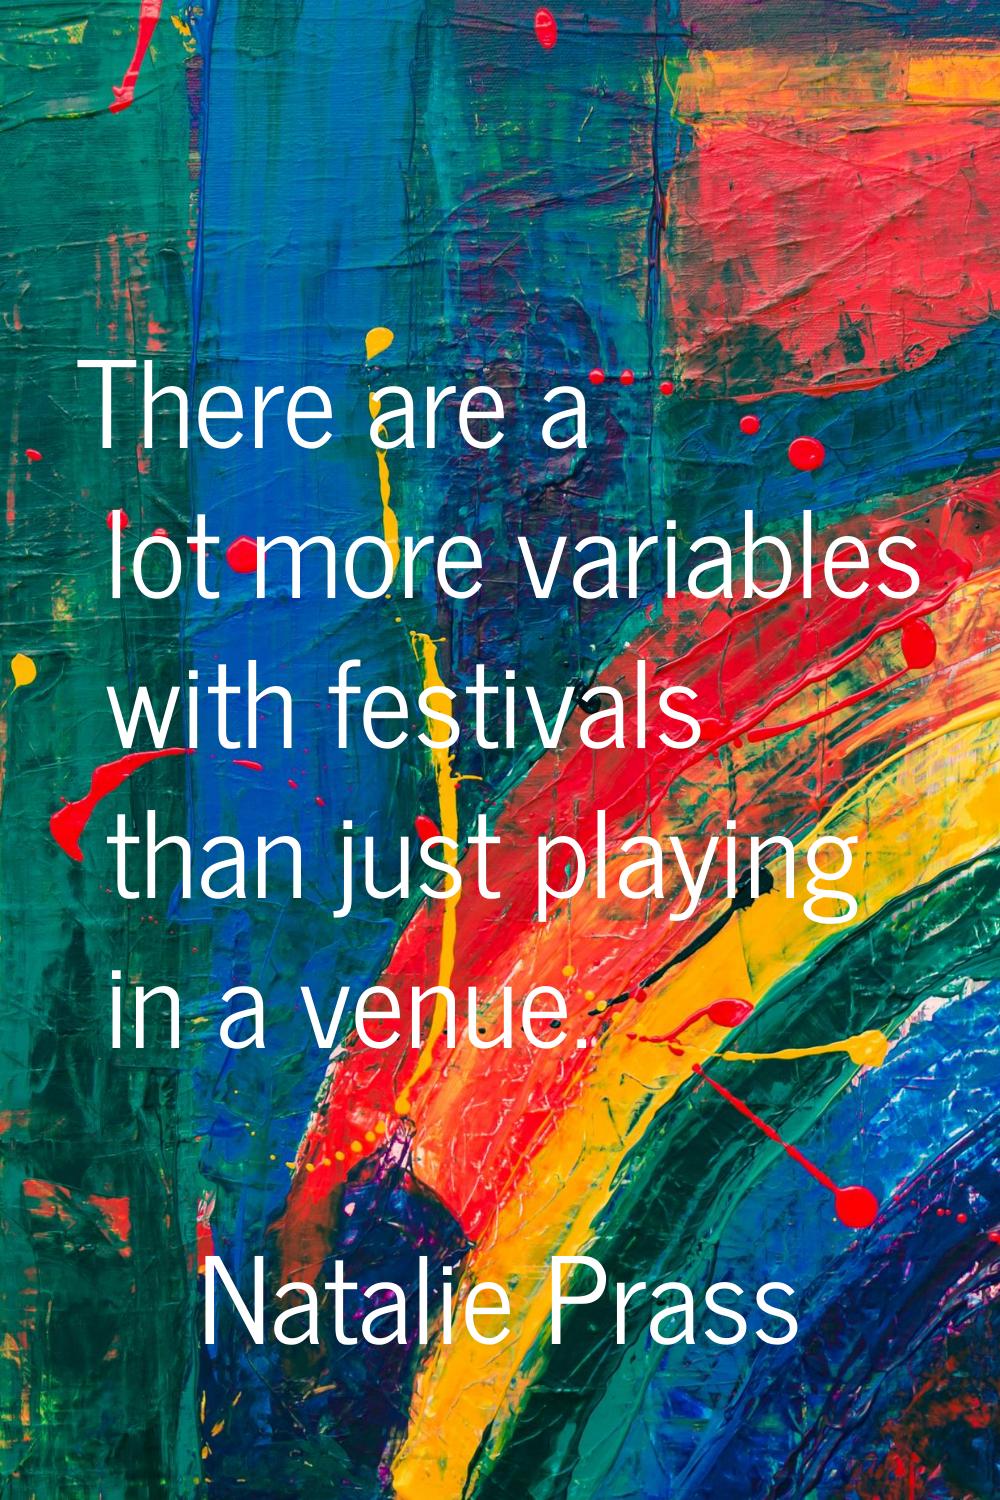 There are a lot more variables with festivals than just playing in a venue.